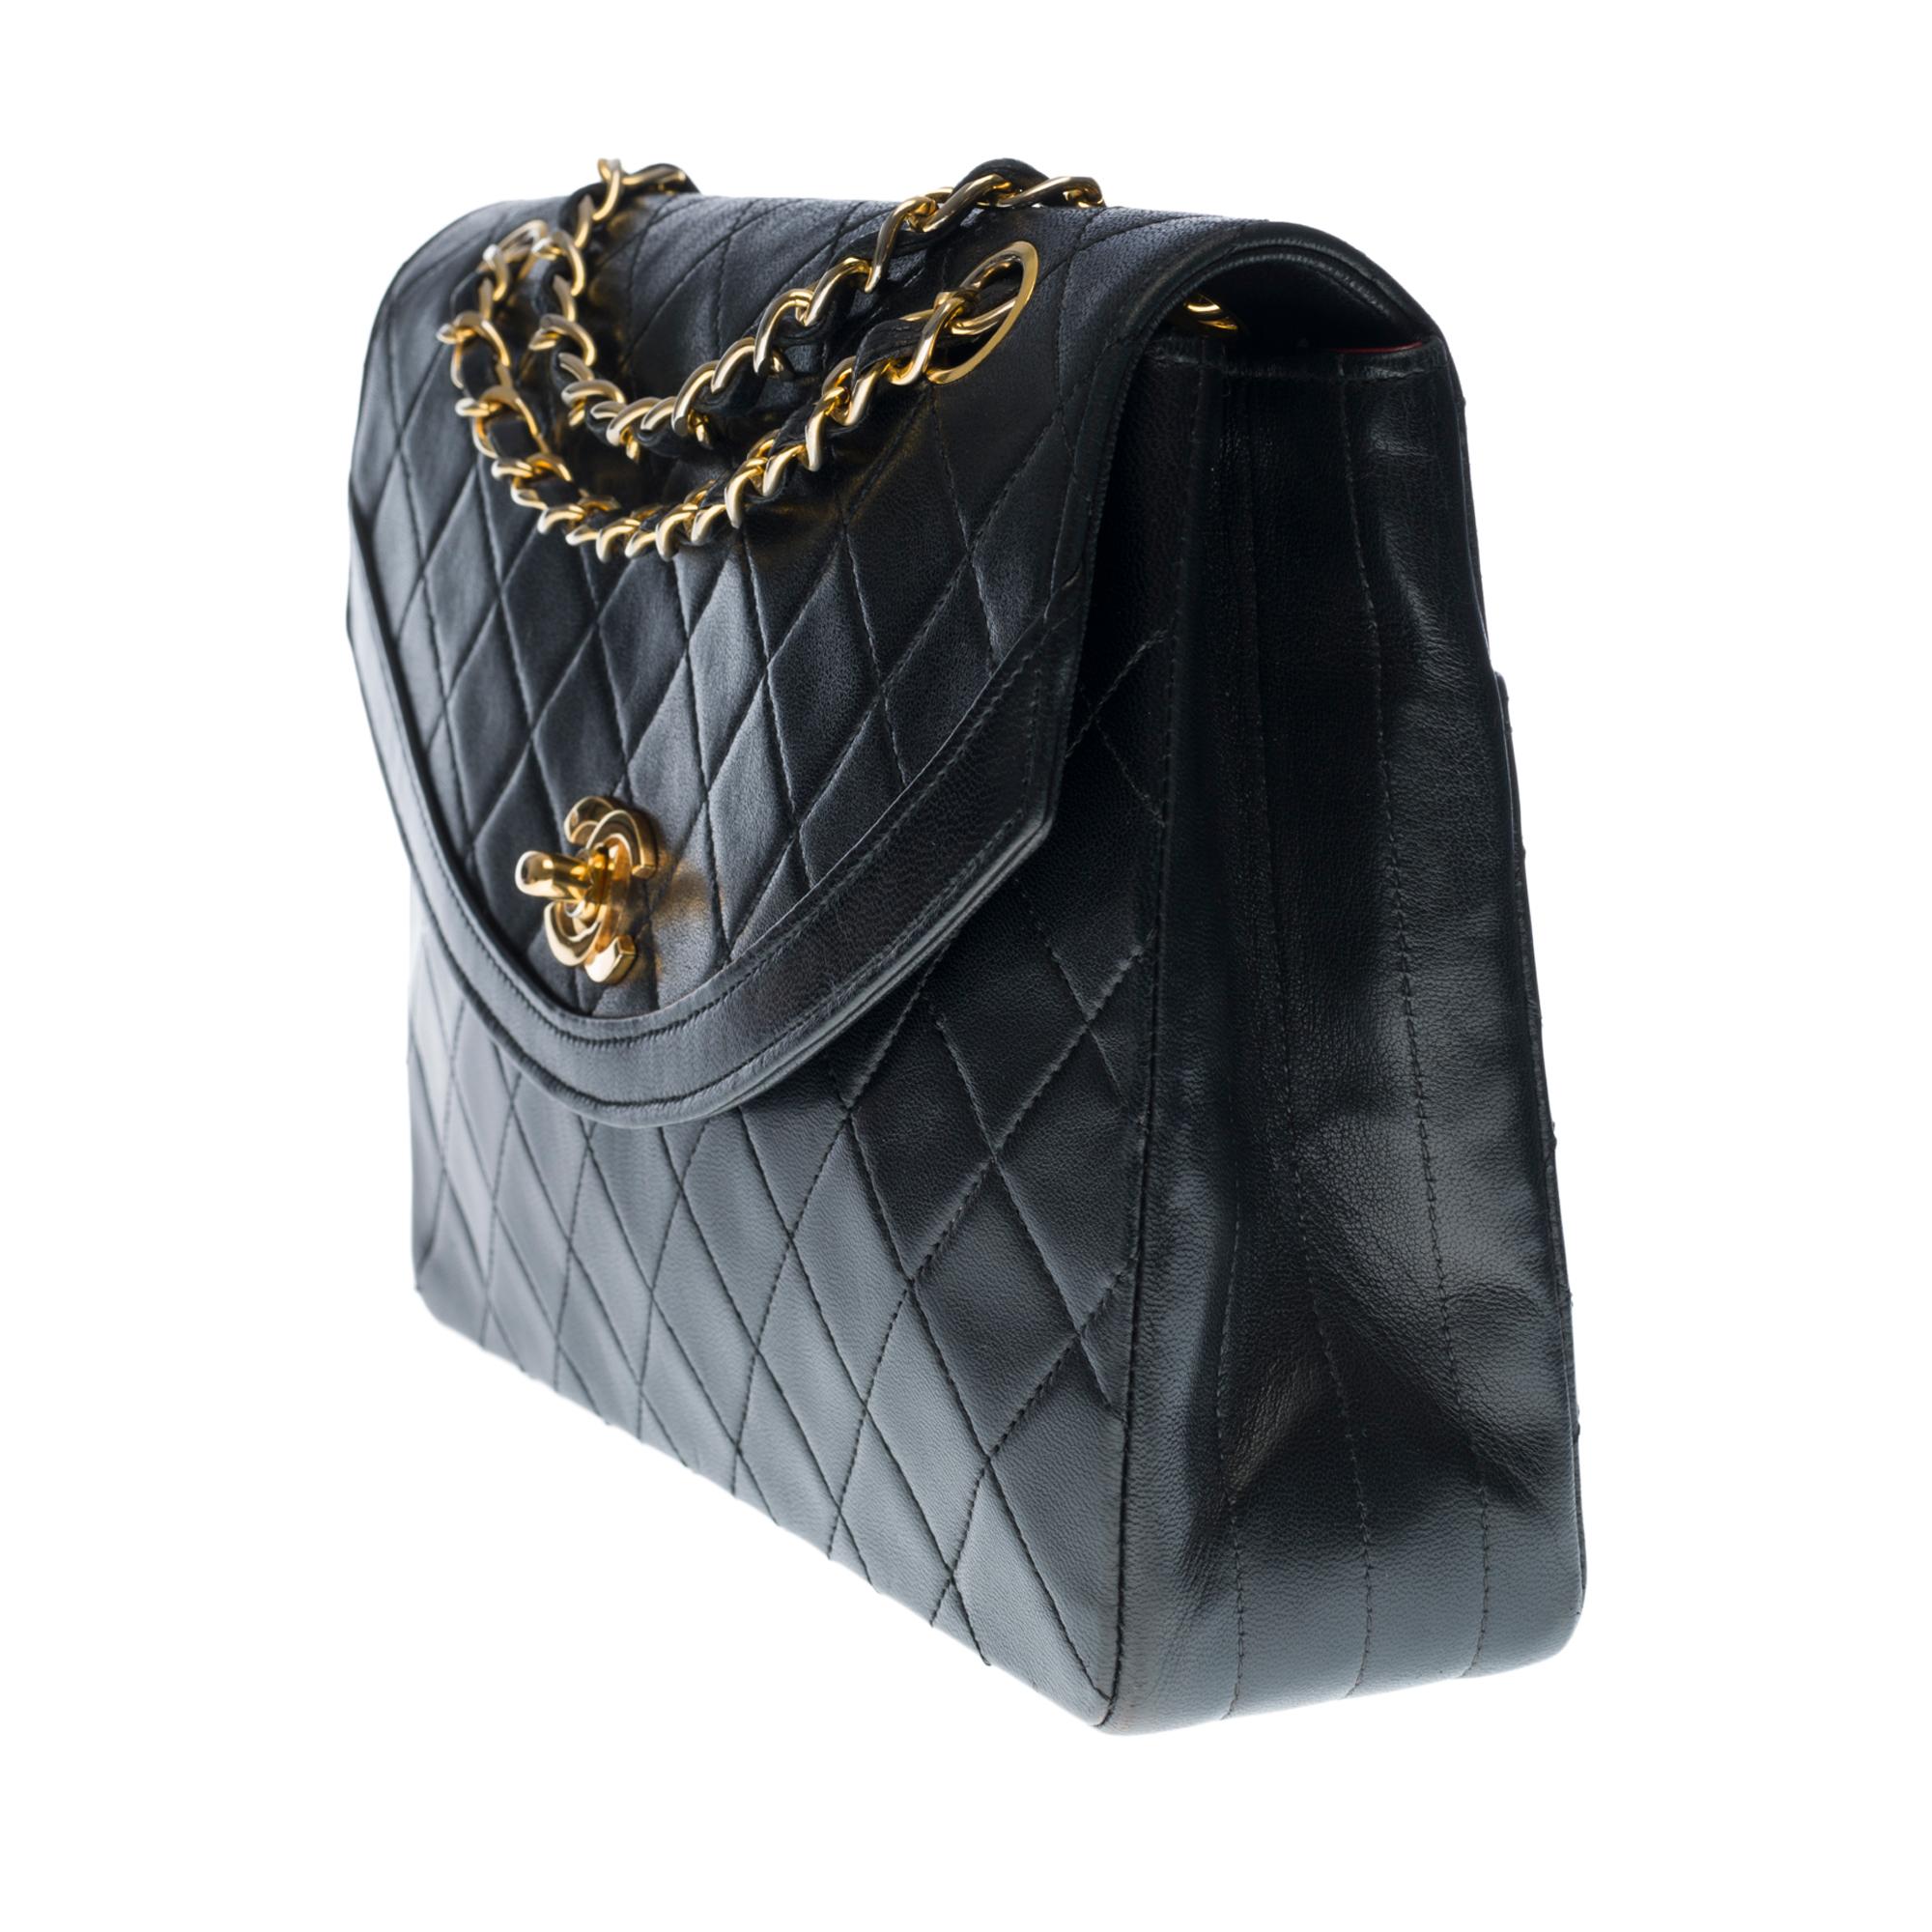 Black Chanel Classic Flap shoulder bag in black quilted lambskin and gold hardware